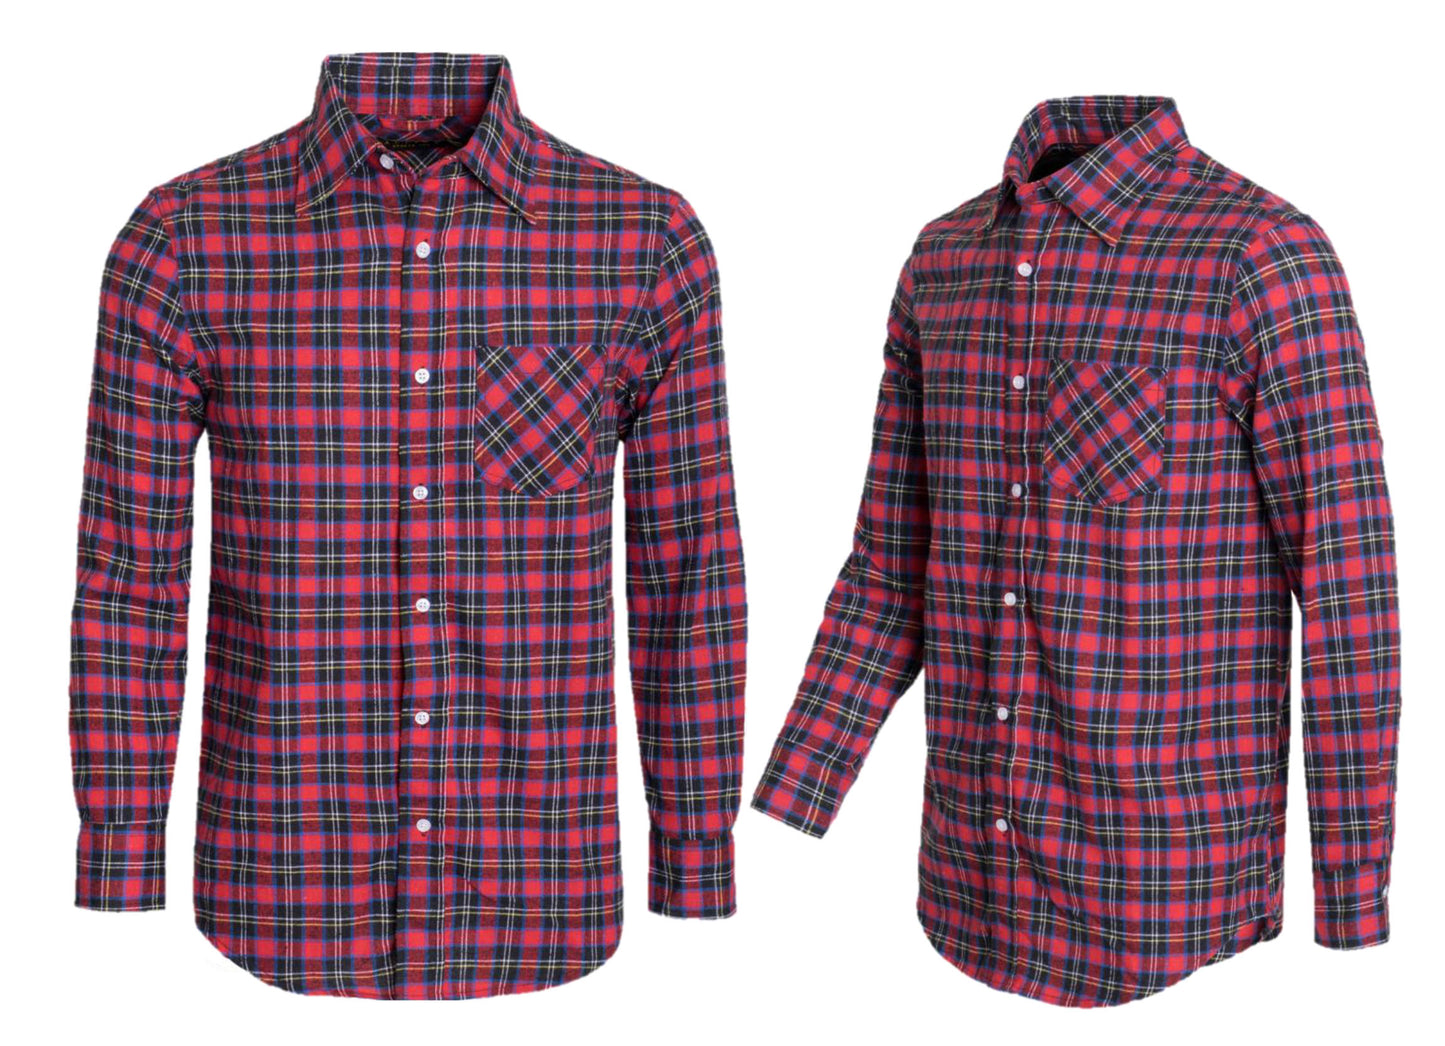 Men's Flannel Shirt Button Down Long Sleeve RED 326 331 391 432 by ACTIVA